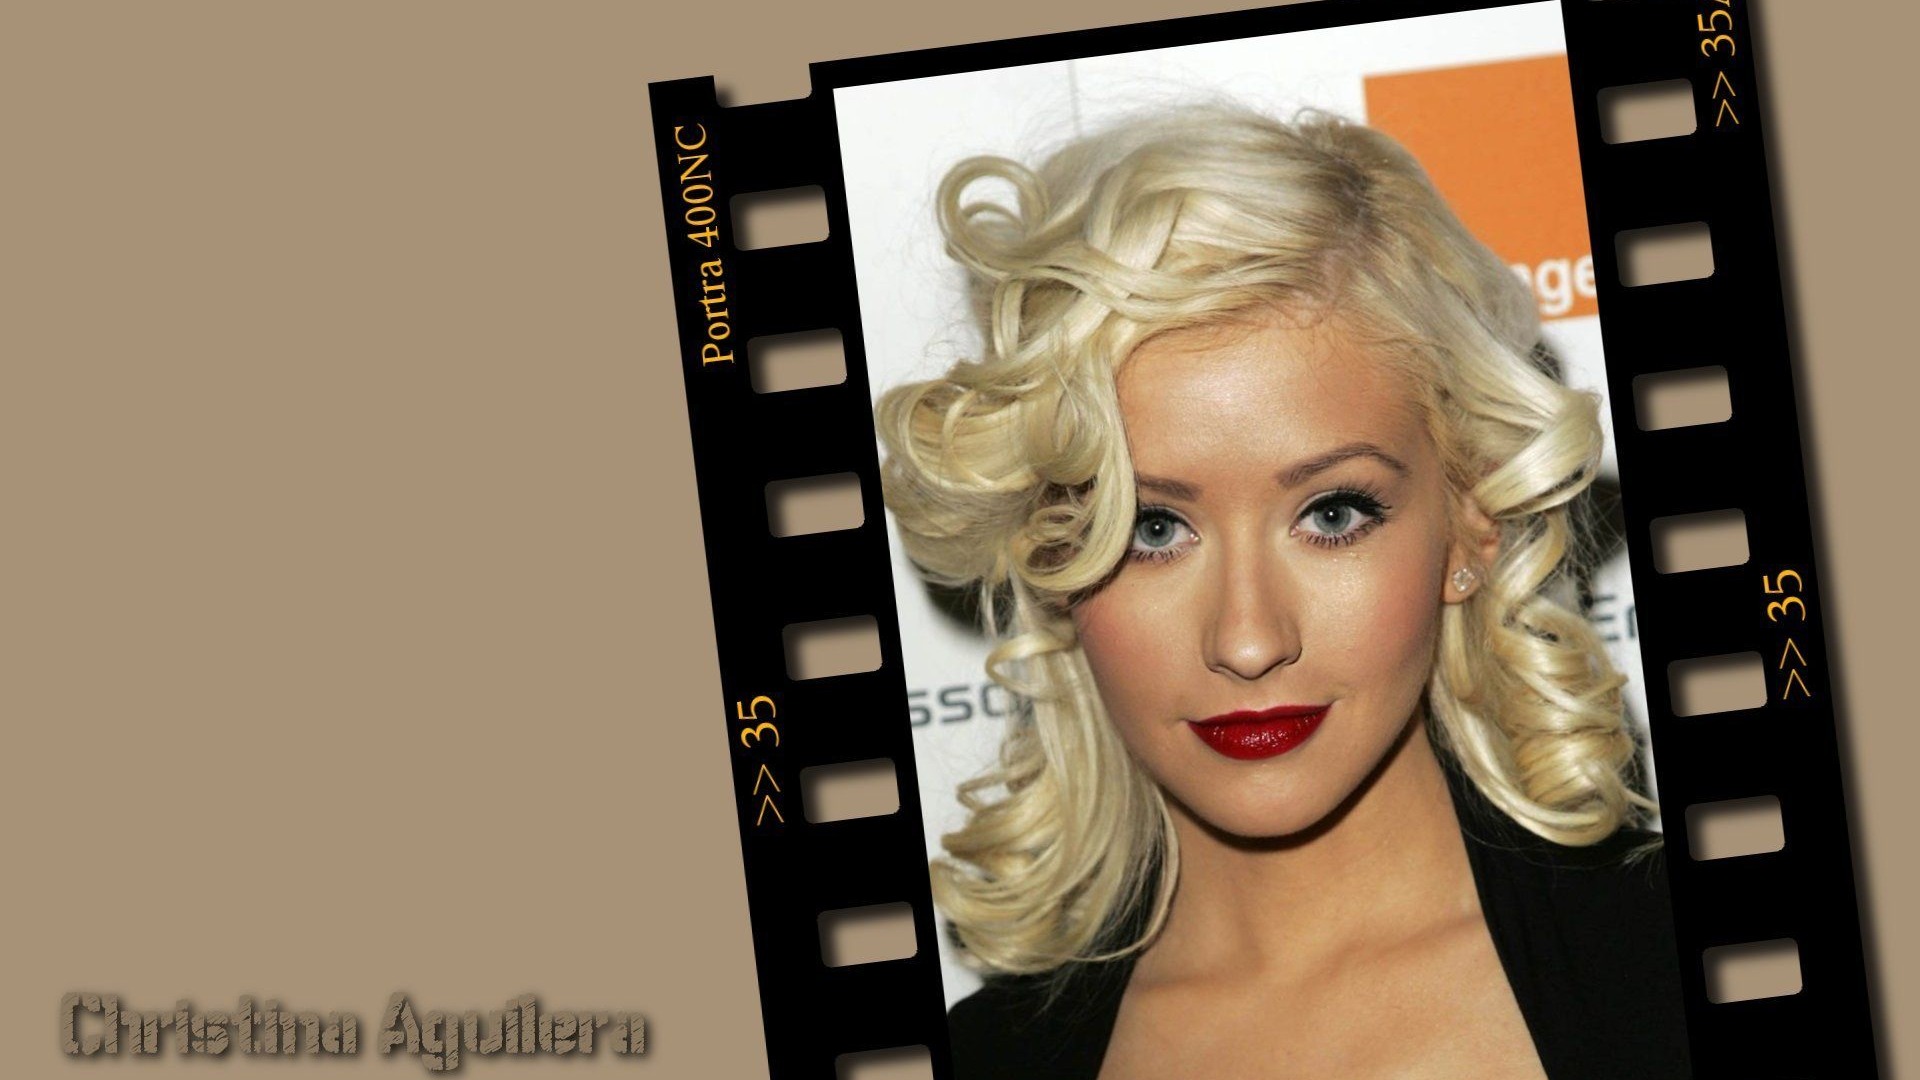 Christina Aguilera #018 - 1920x1080 Wallpapers Pictures Photos Images